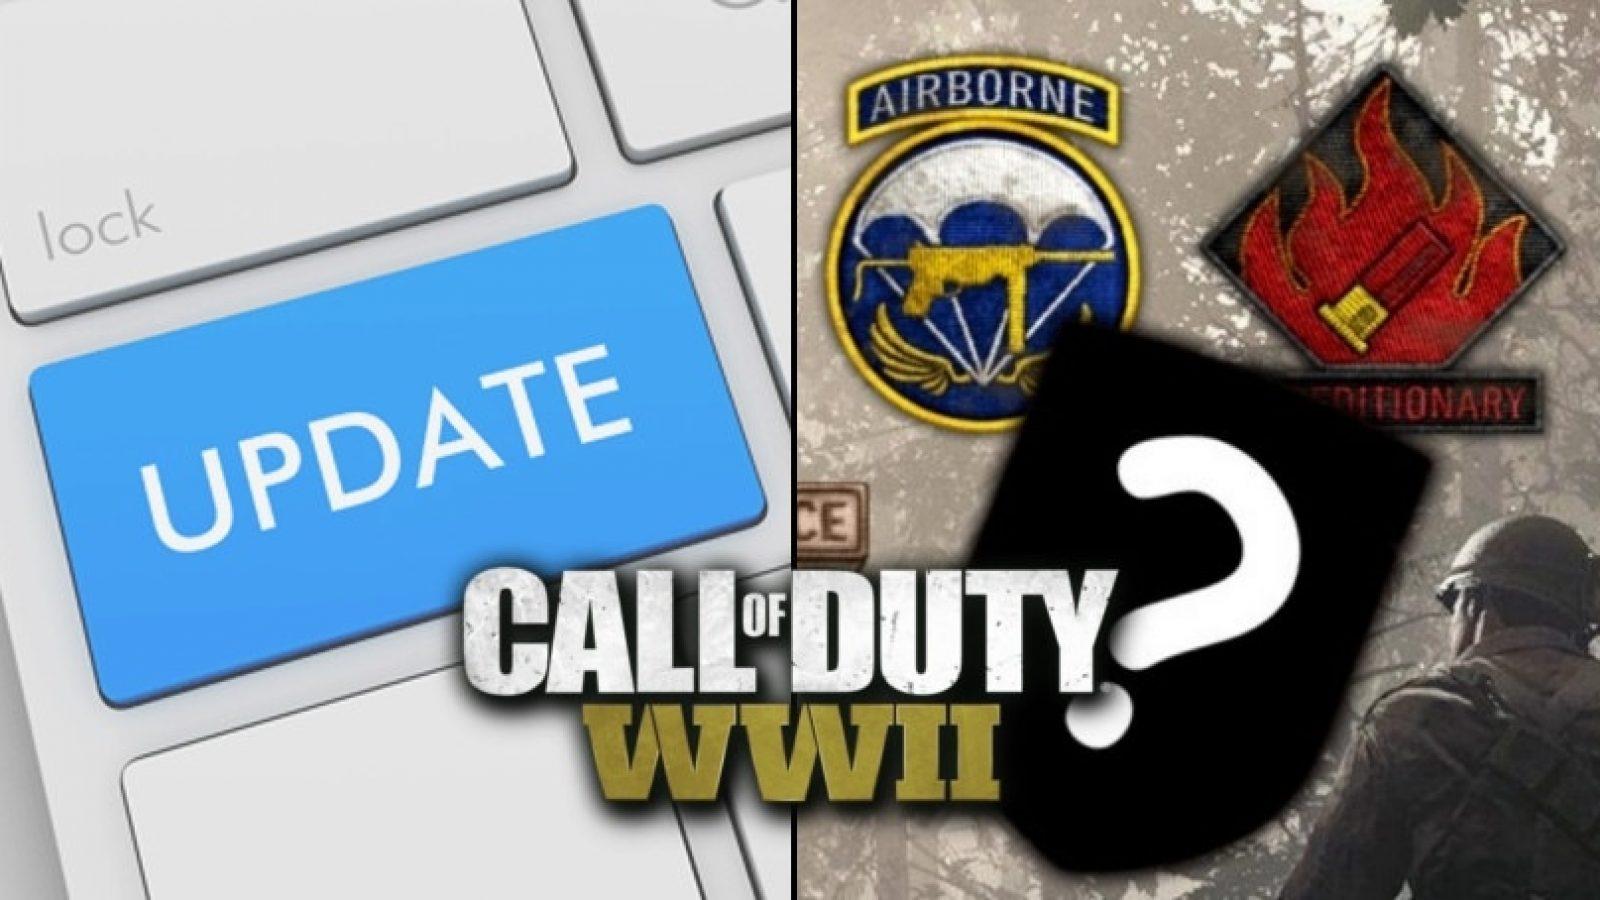 Call of Duty WW2 disc version unplayable without a 9GB patch